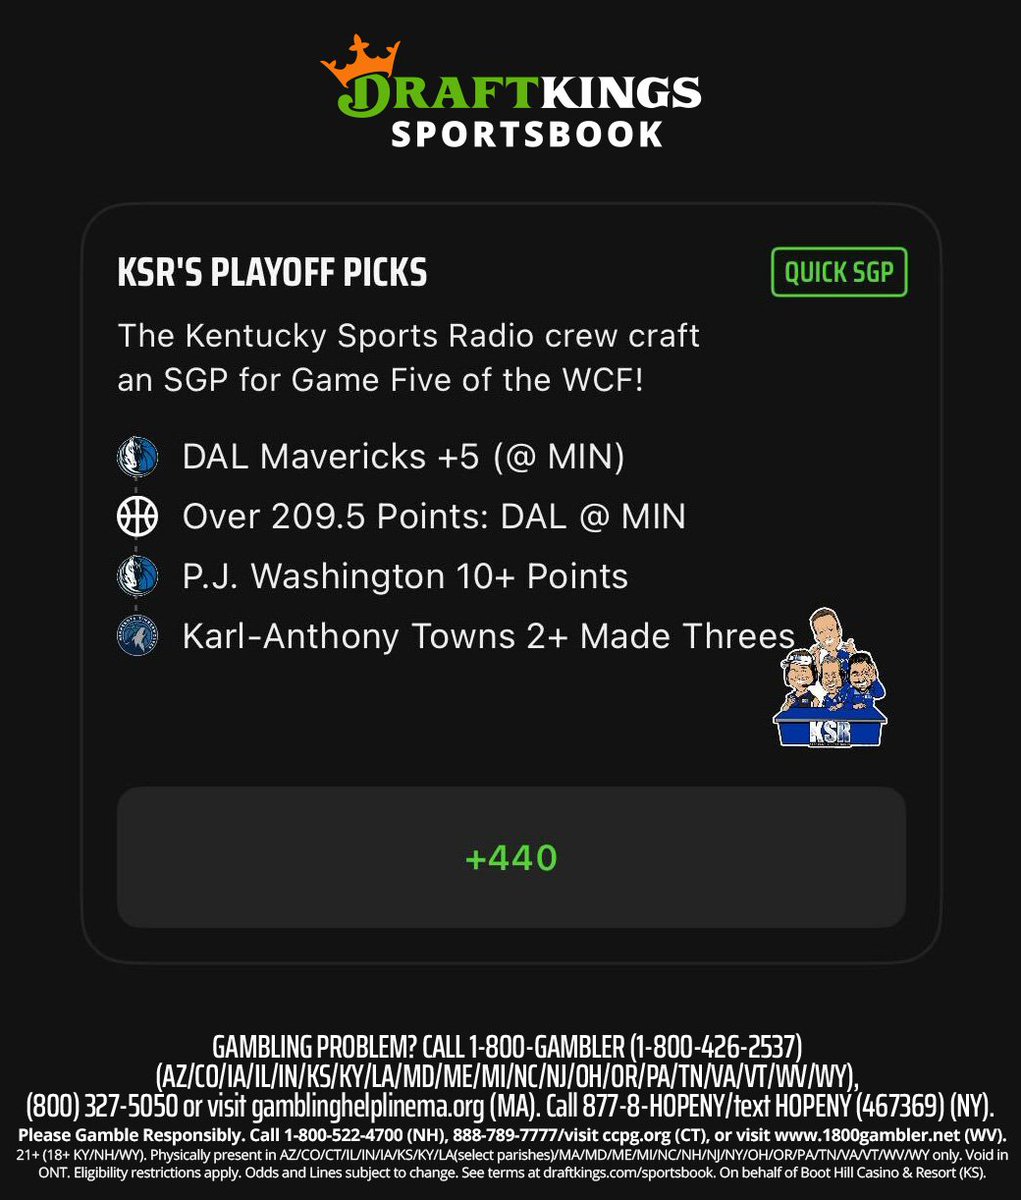 We've had some success with the Western Conference Finals, so the KSR Parlay is going back for more in Game 5 tonight.

Go Mavs, former Cats, and points.

#DKPartner